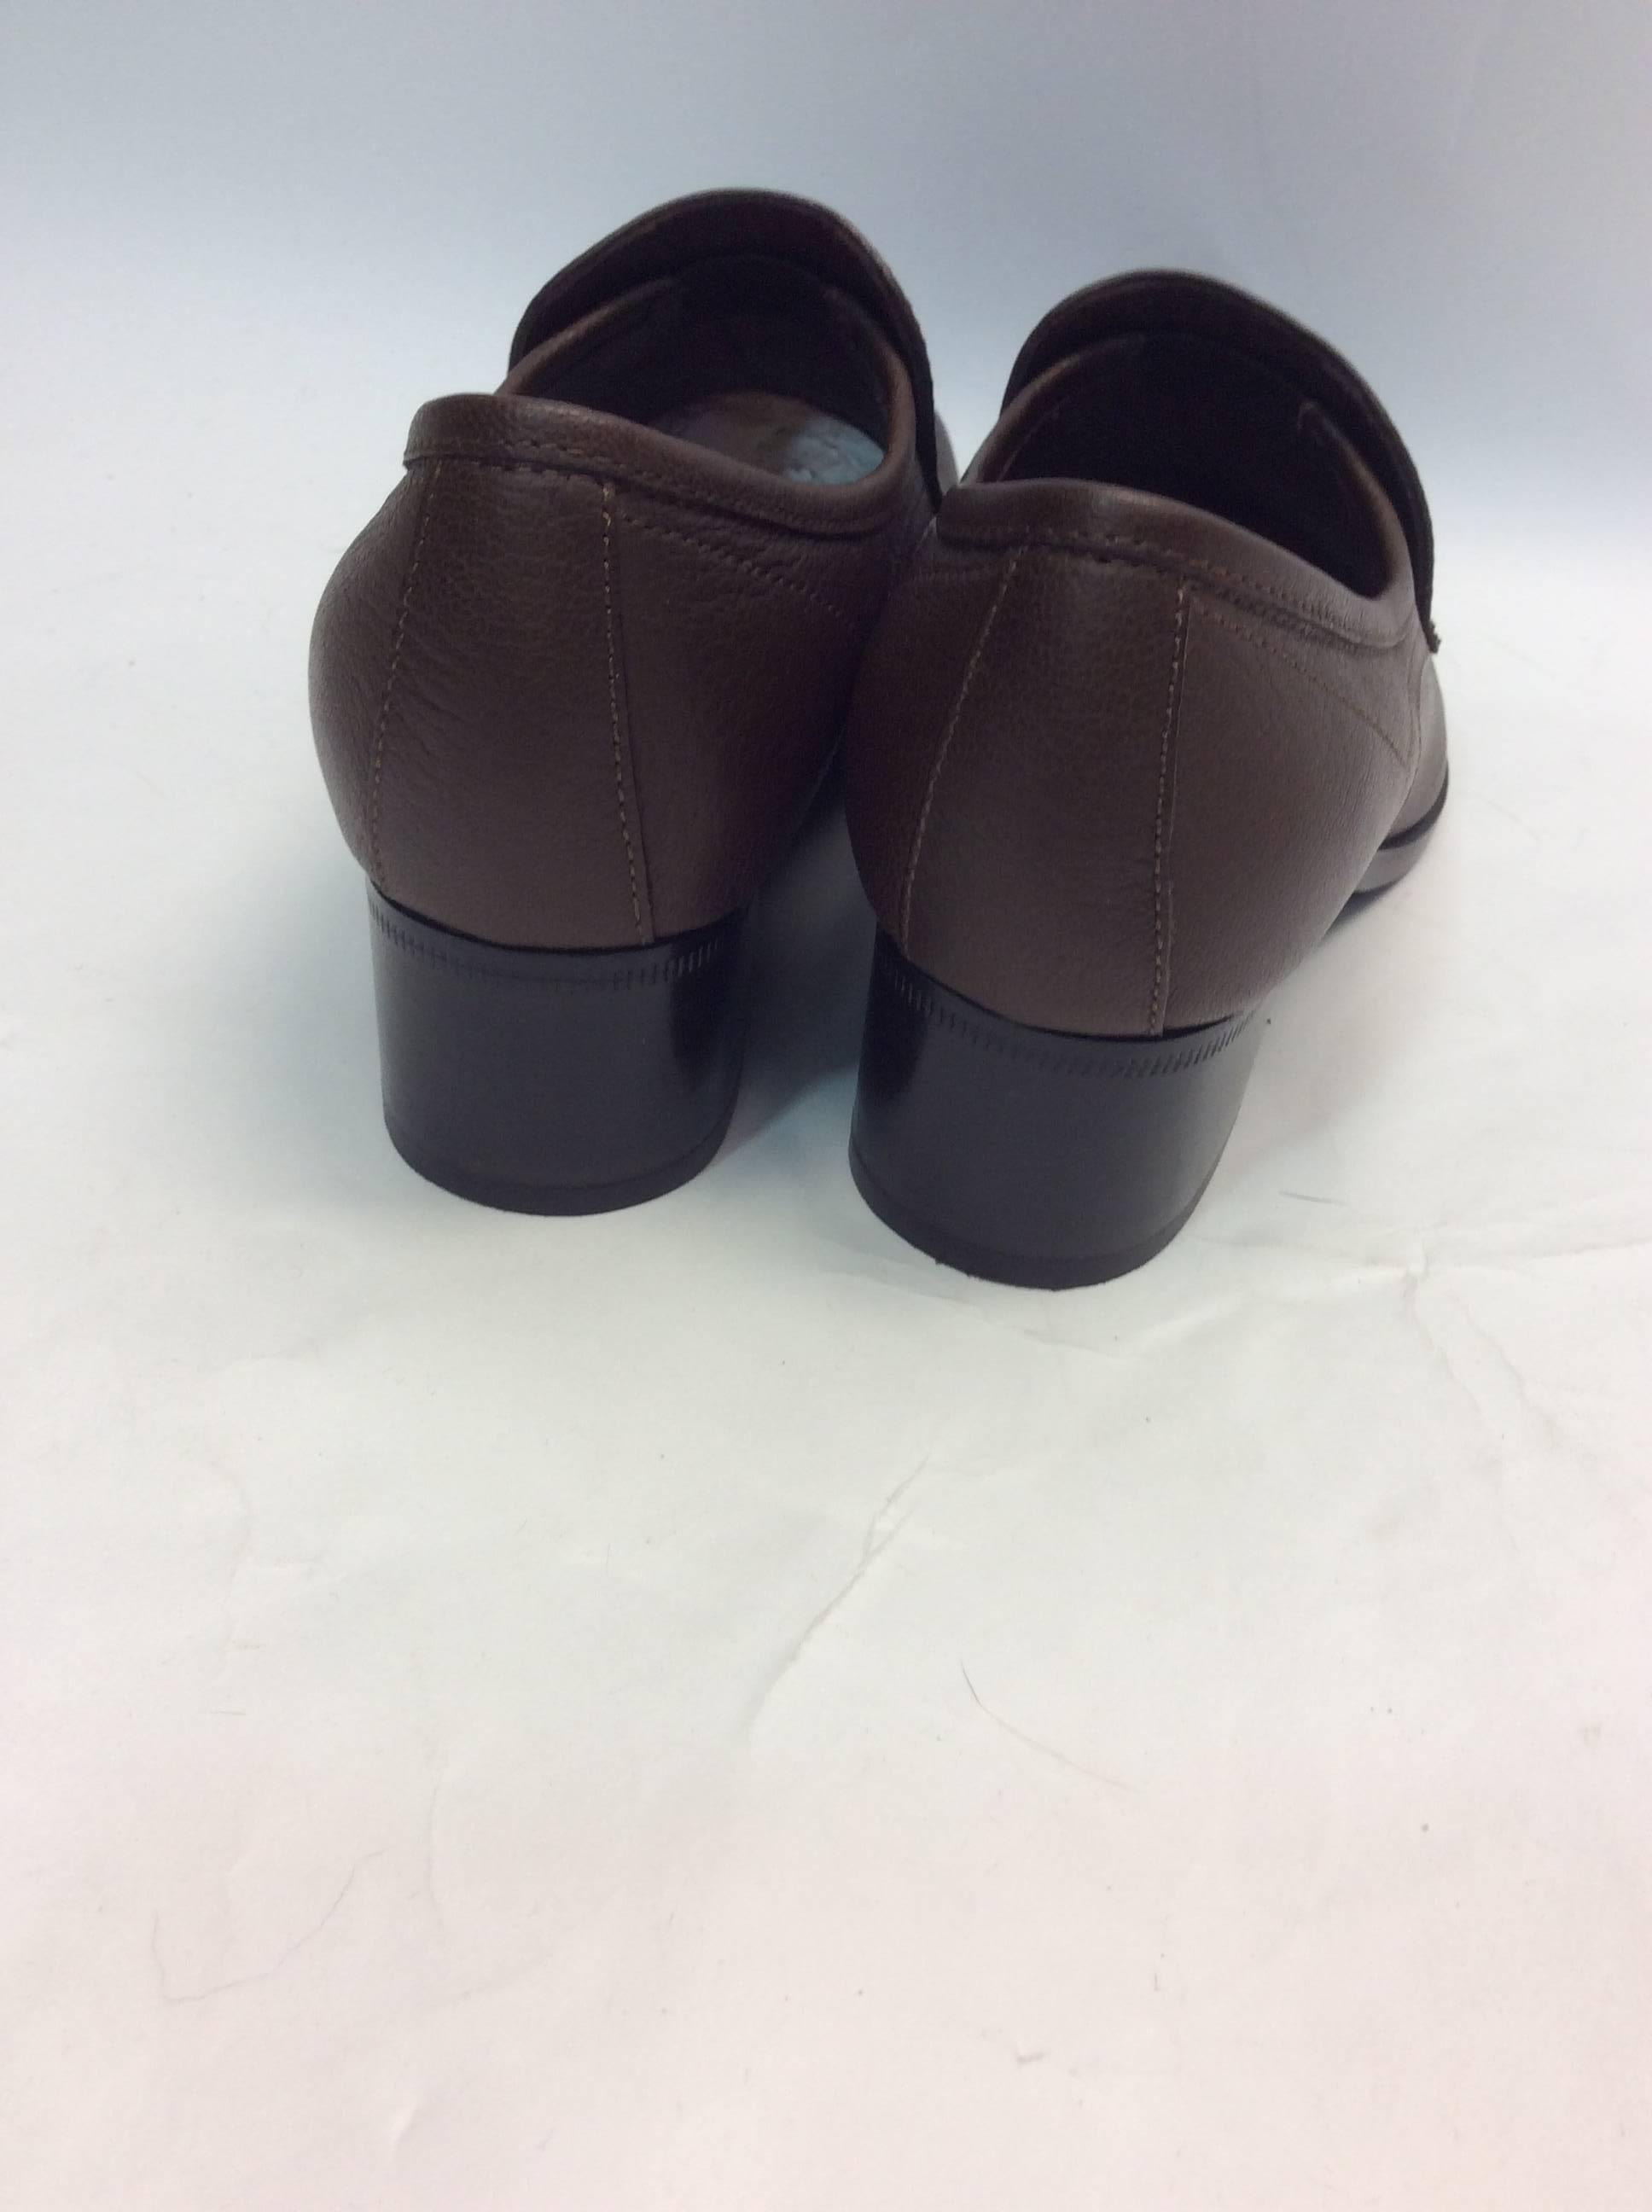 Lanvin Brown Leather Loafers In Excellent Condition For Sale In Narberth, PA